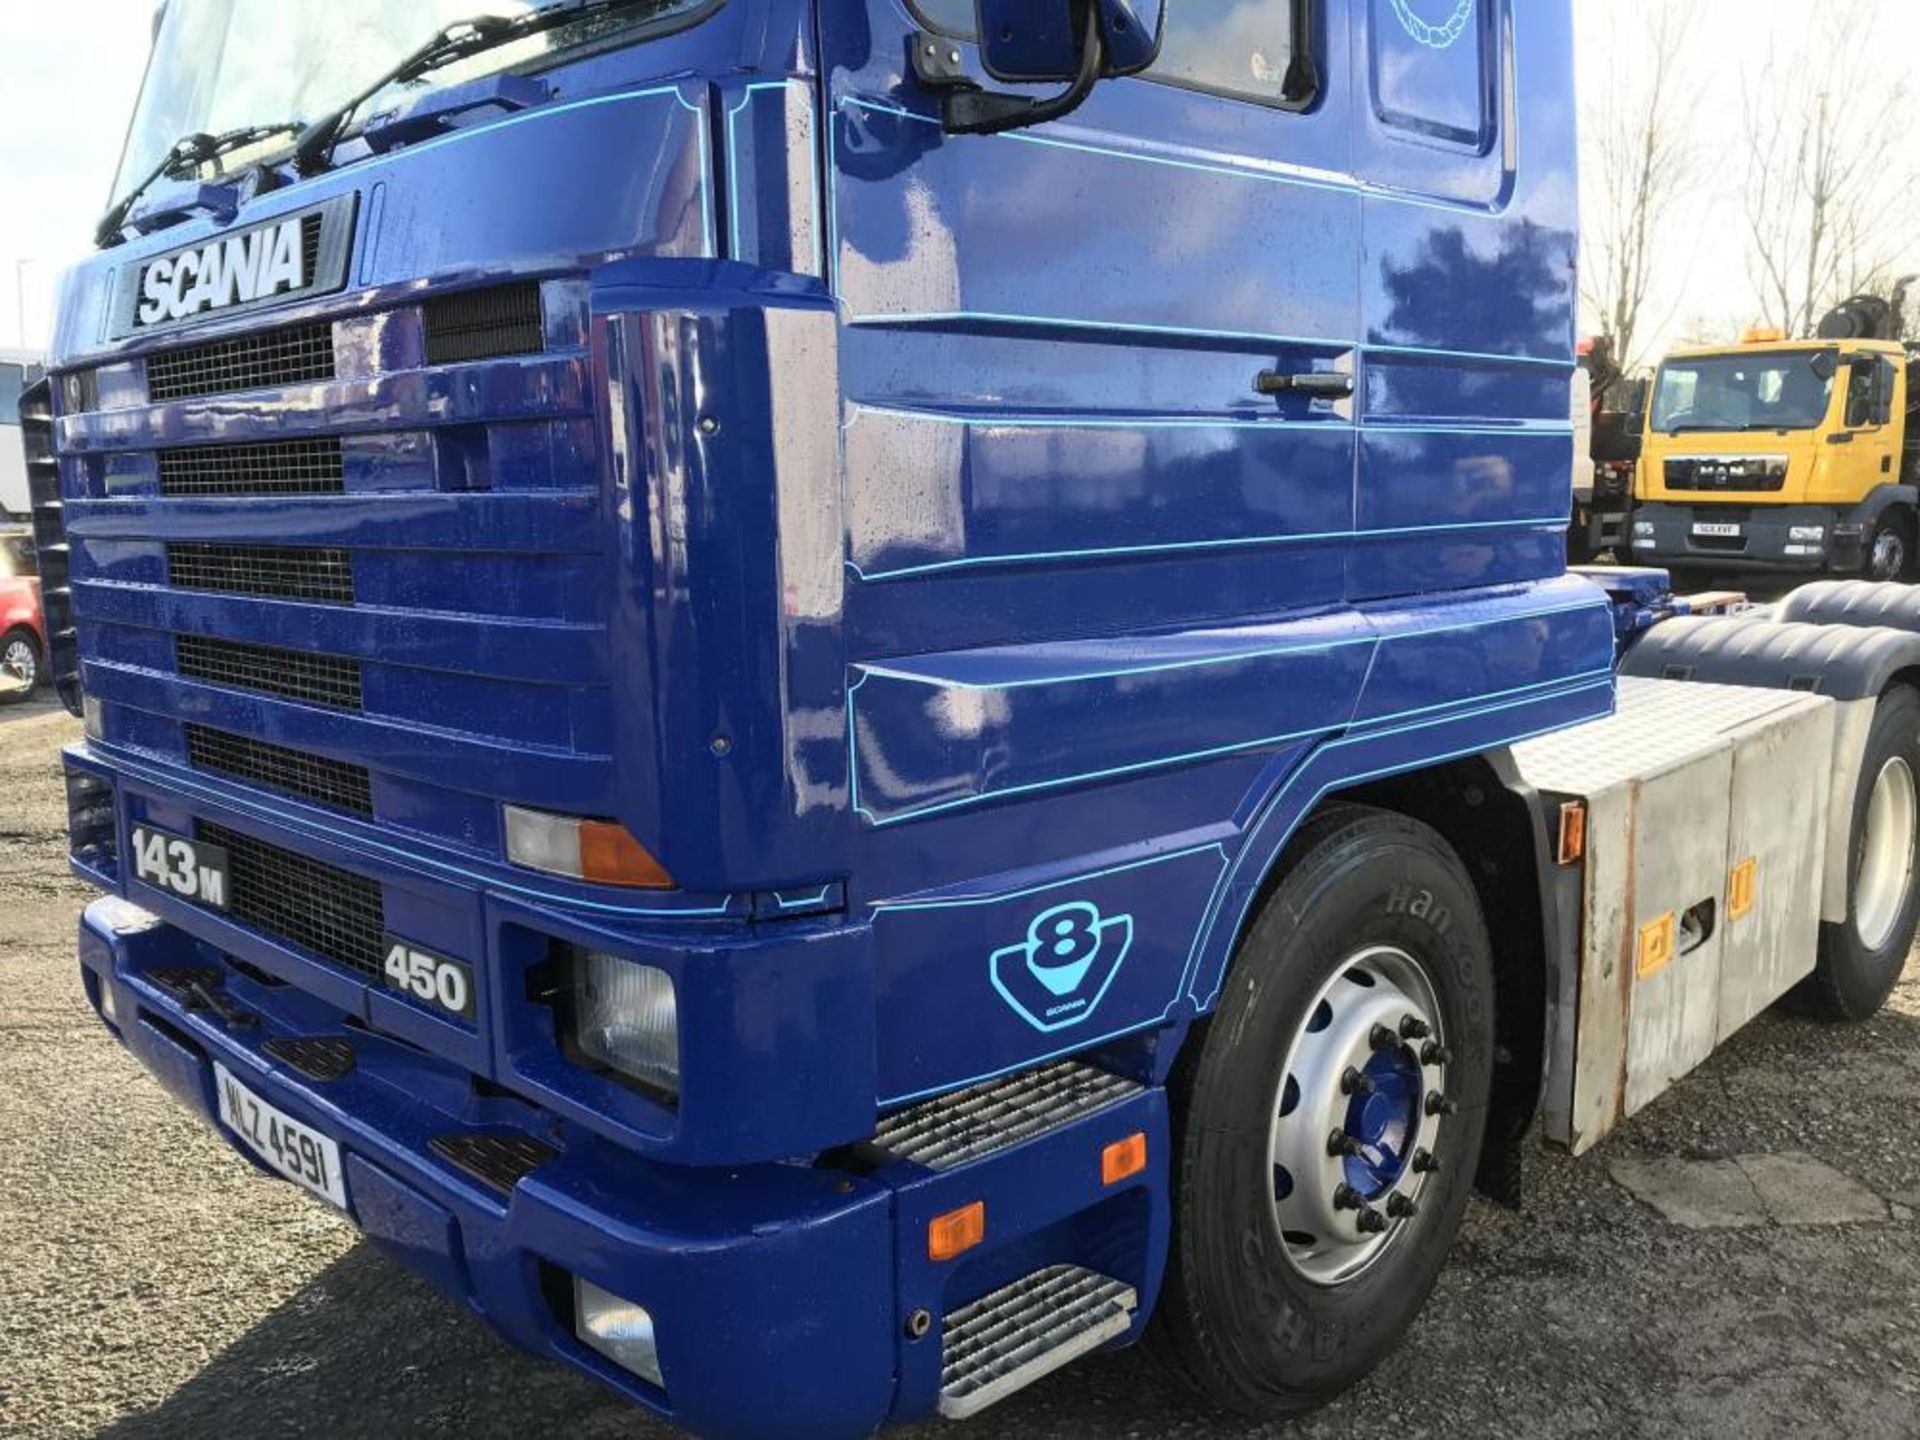 1996 SCANIA 143 450 TAG AXLE TOP LINE STREAM LINE 6X2 TRACTOR UNIT V8 GRS 900 GEARBOX GOOD RUNNER - Image 4 of 31